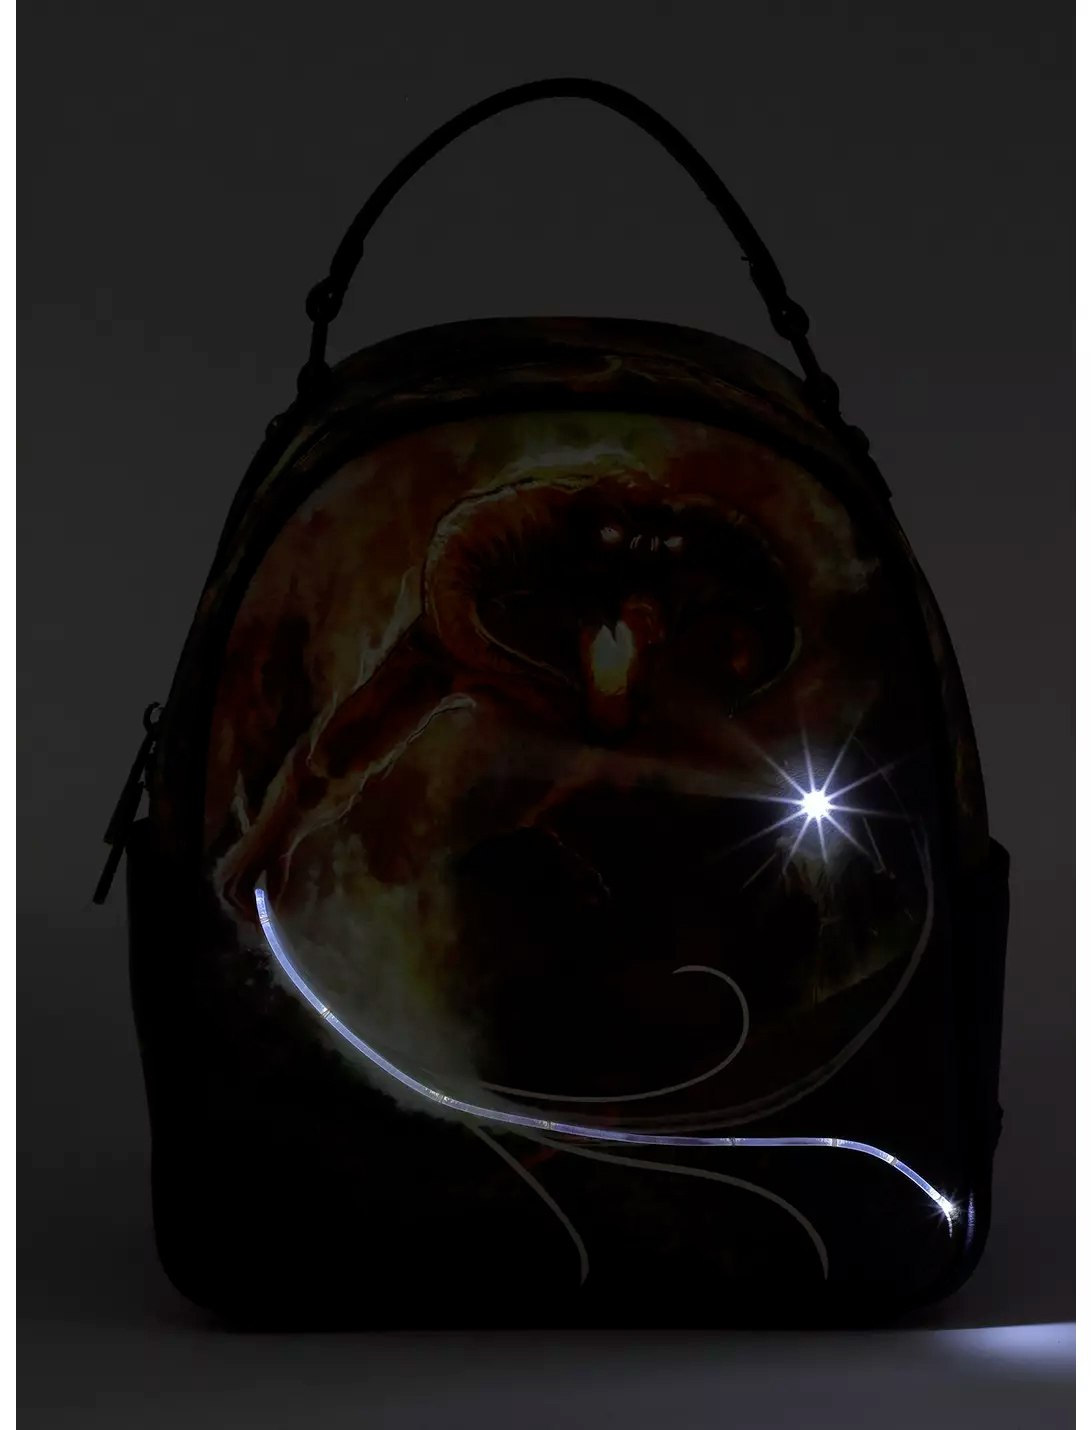 Balrog and Gandalf mini-backpack illuminated with LEDs (The Lord of the Rings)